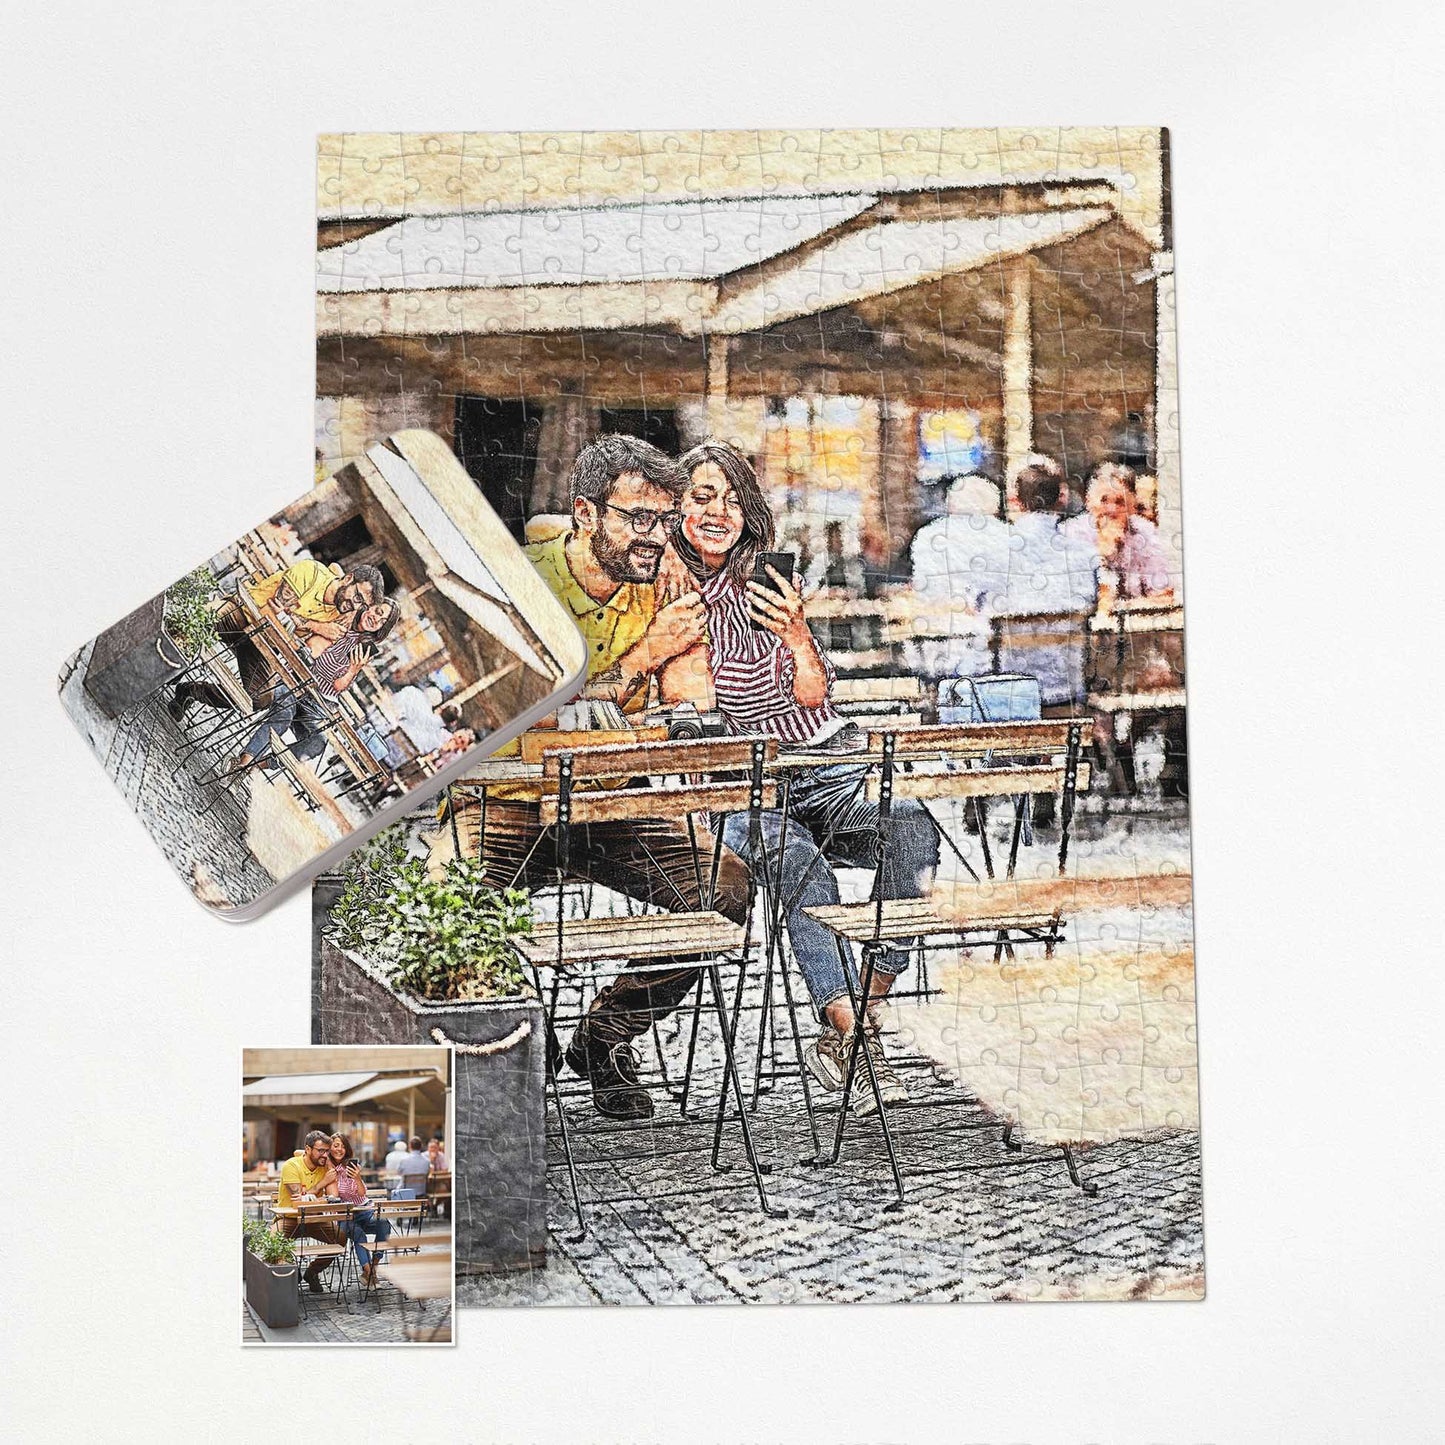 Capture cherished memories with a Personalised Watercolor Jigsaw Puzzle painting. A delightful watercolour effect brings vibrant, vivid colours to life. Handmade on wooden or cardboard, this dye sublimation print promises fun, happiness